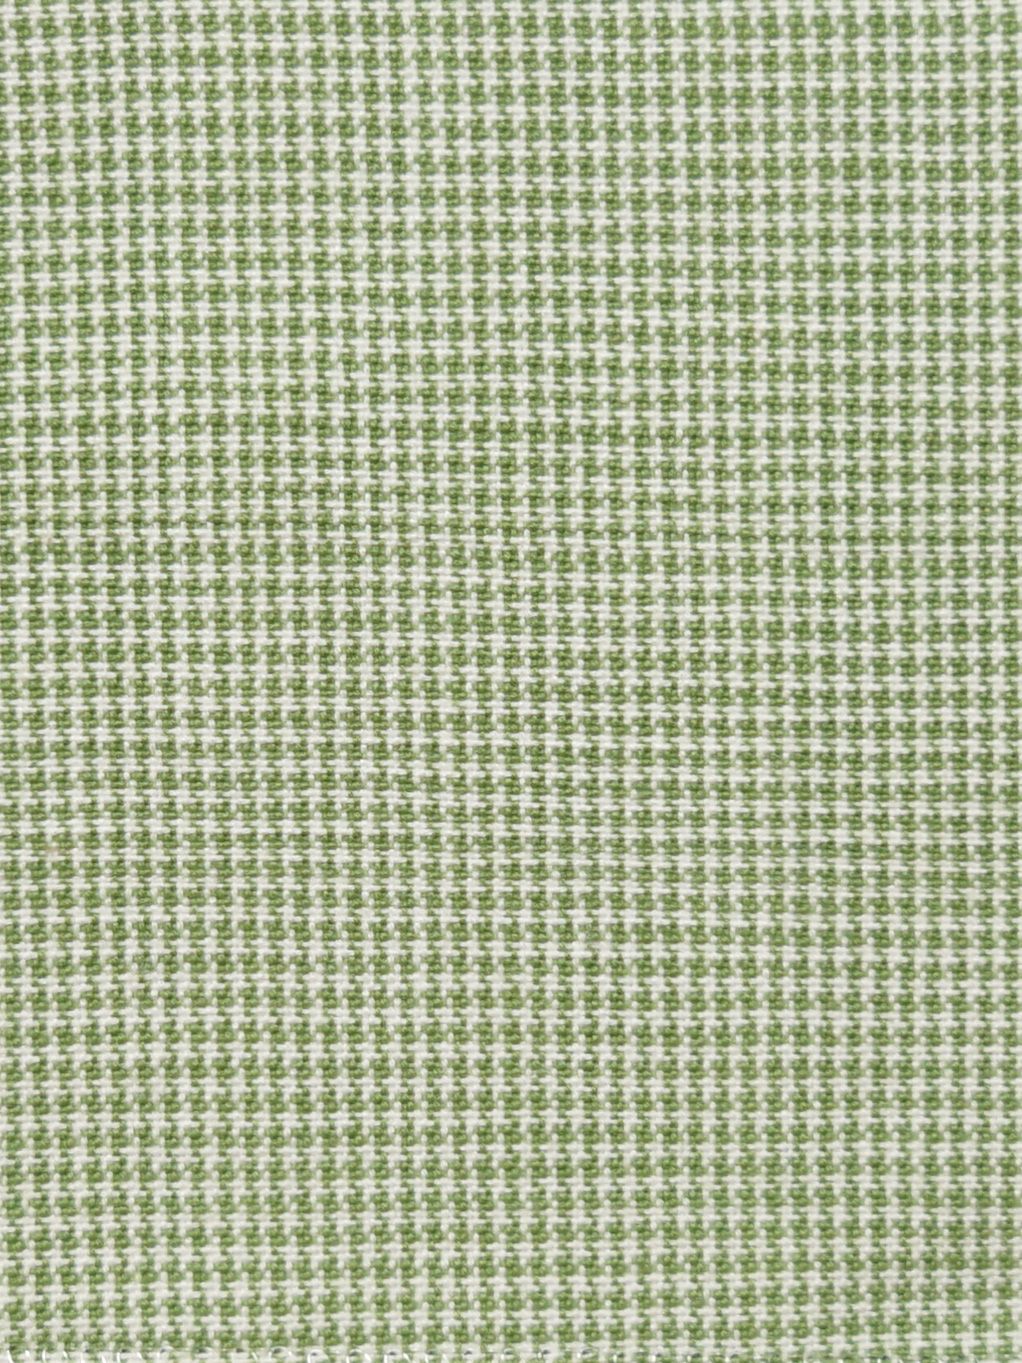 Chatham fabric in green color - pattern number PQ 00031321 - by Scalamandre in the Old World Weavers collection